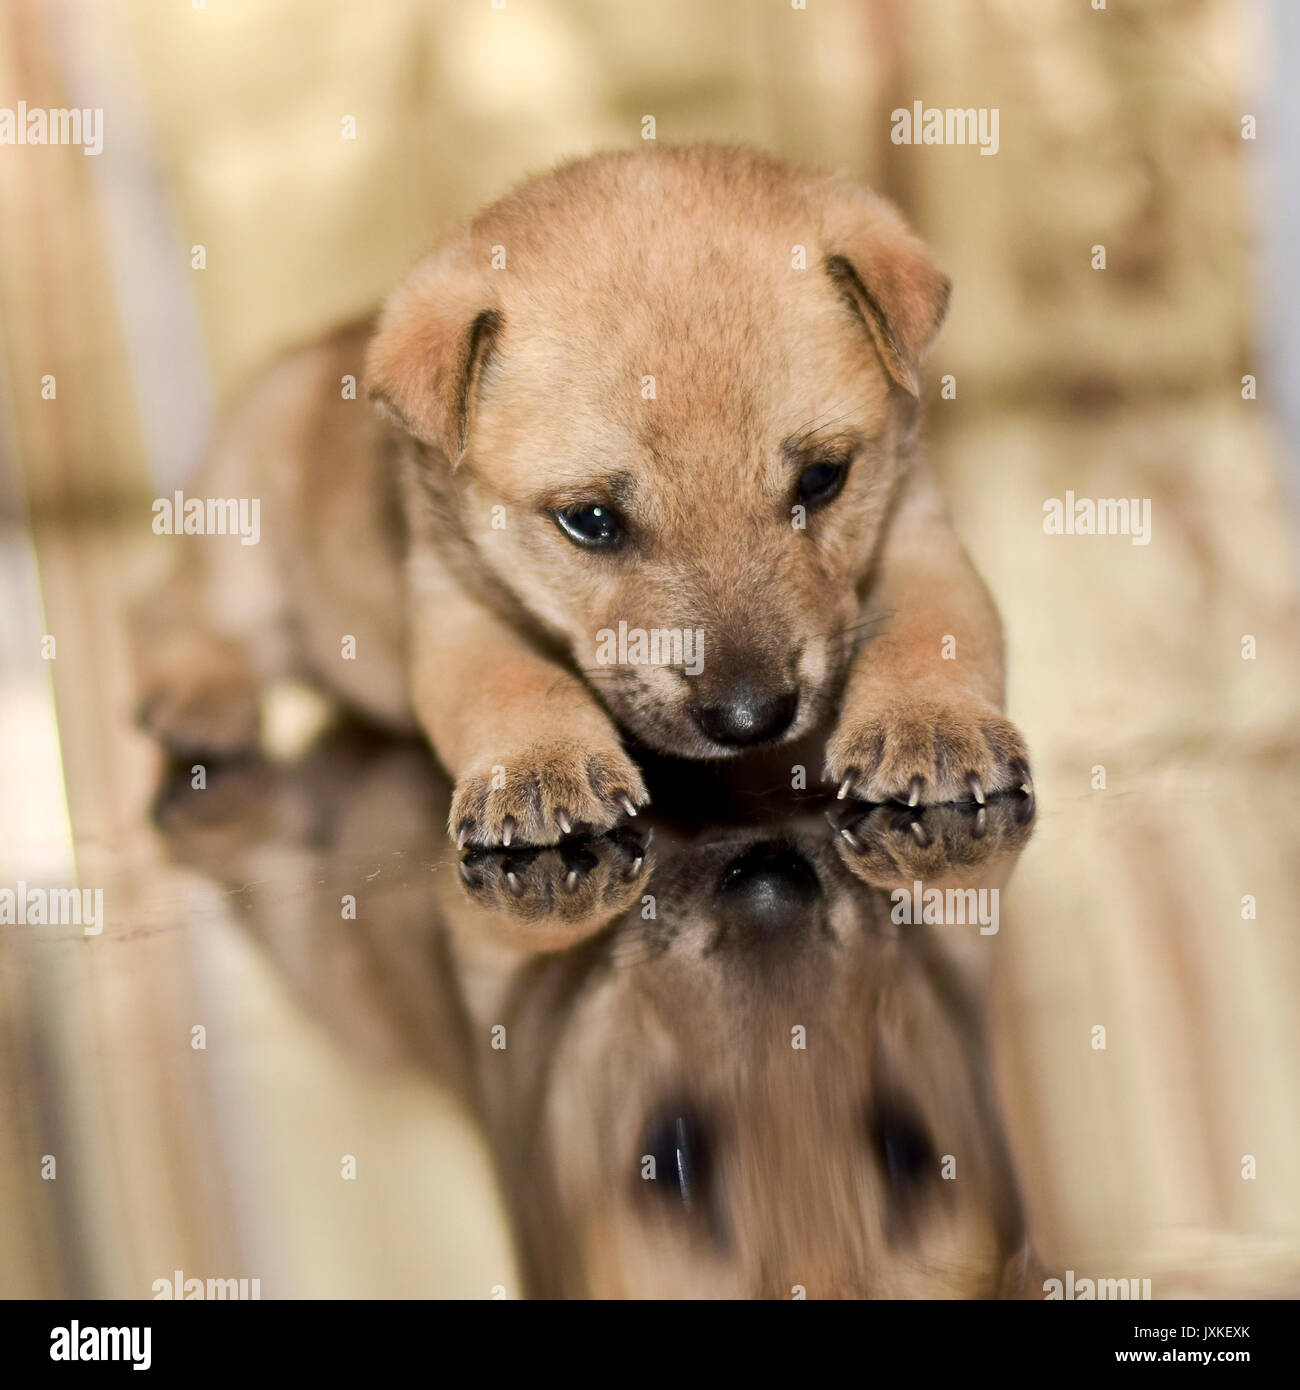 The domestic dog is lying on the floor Stock Photo